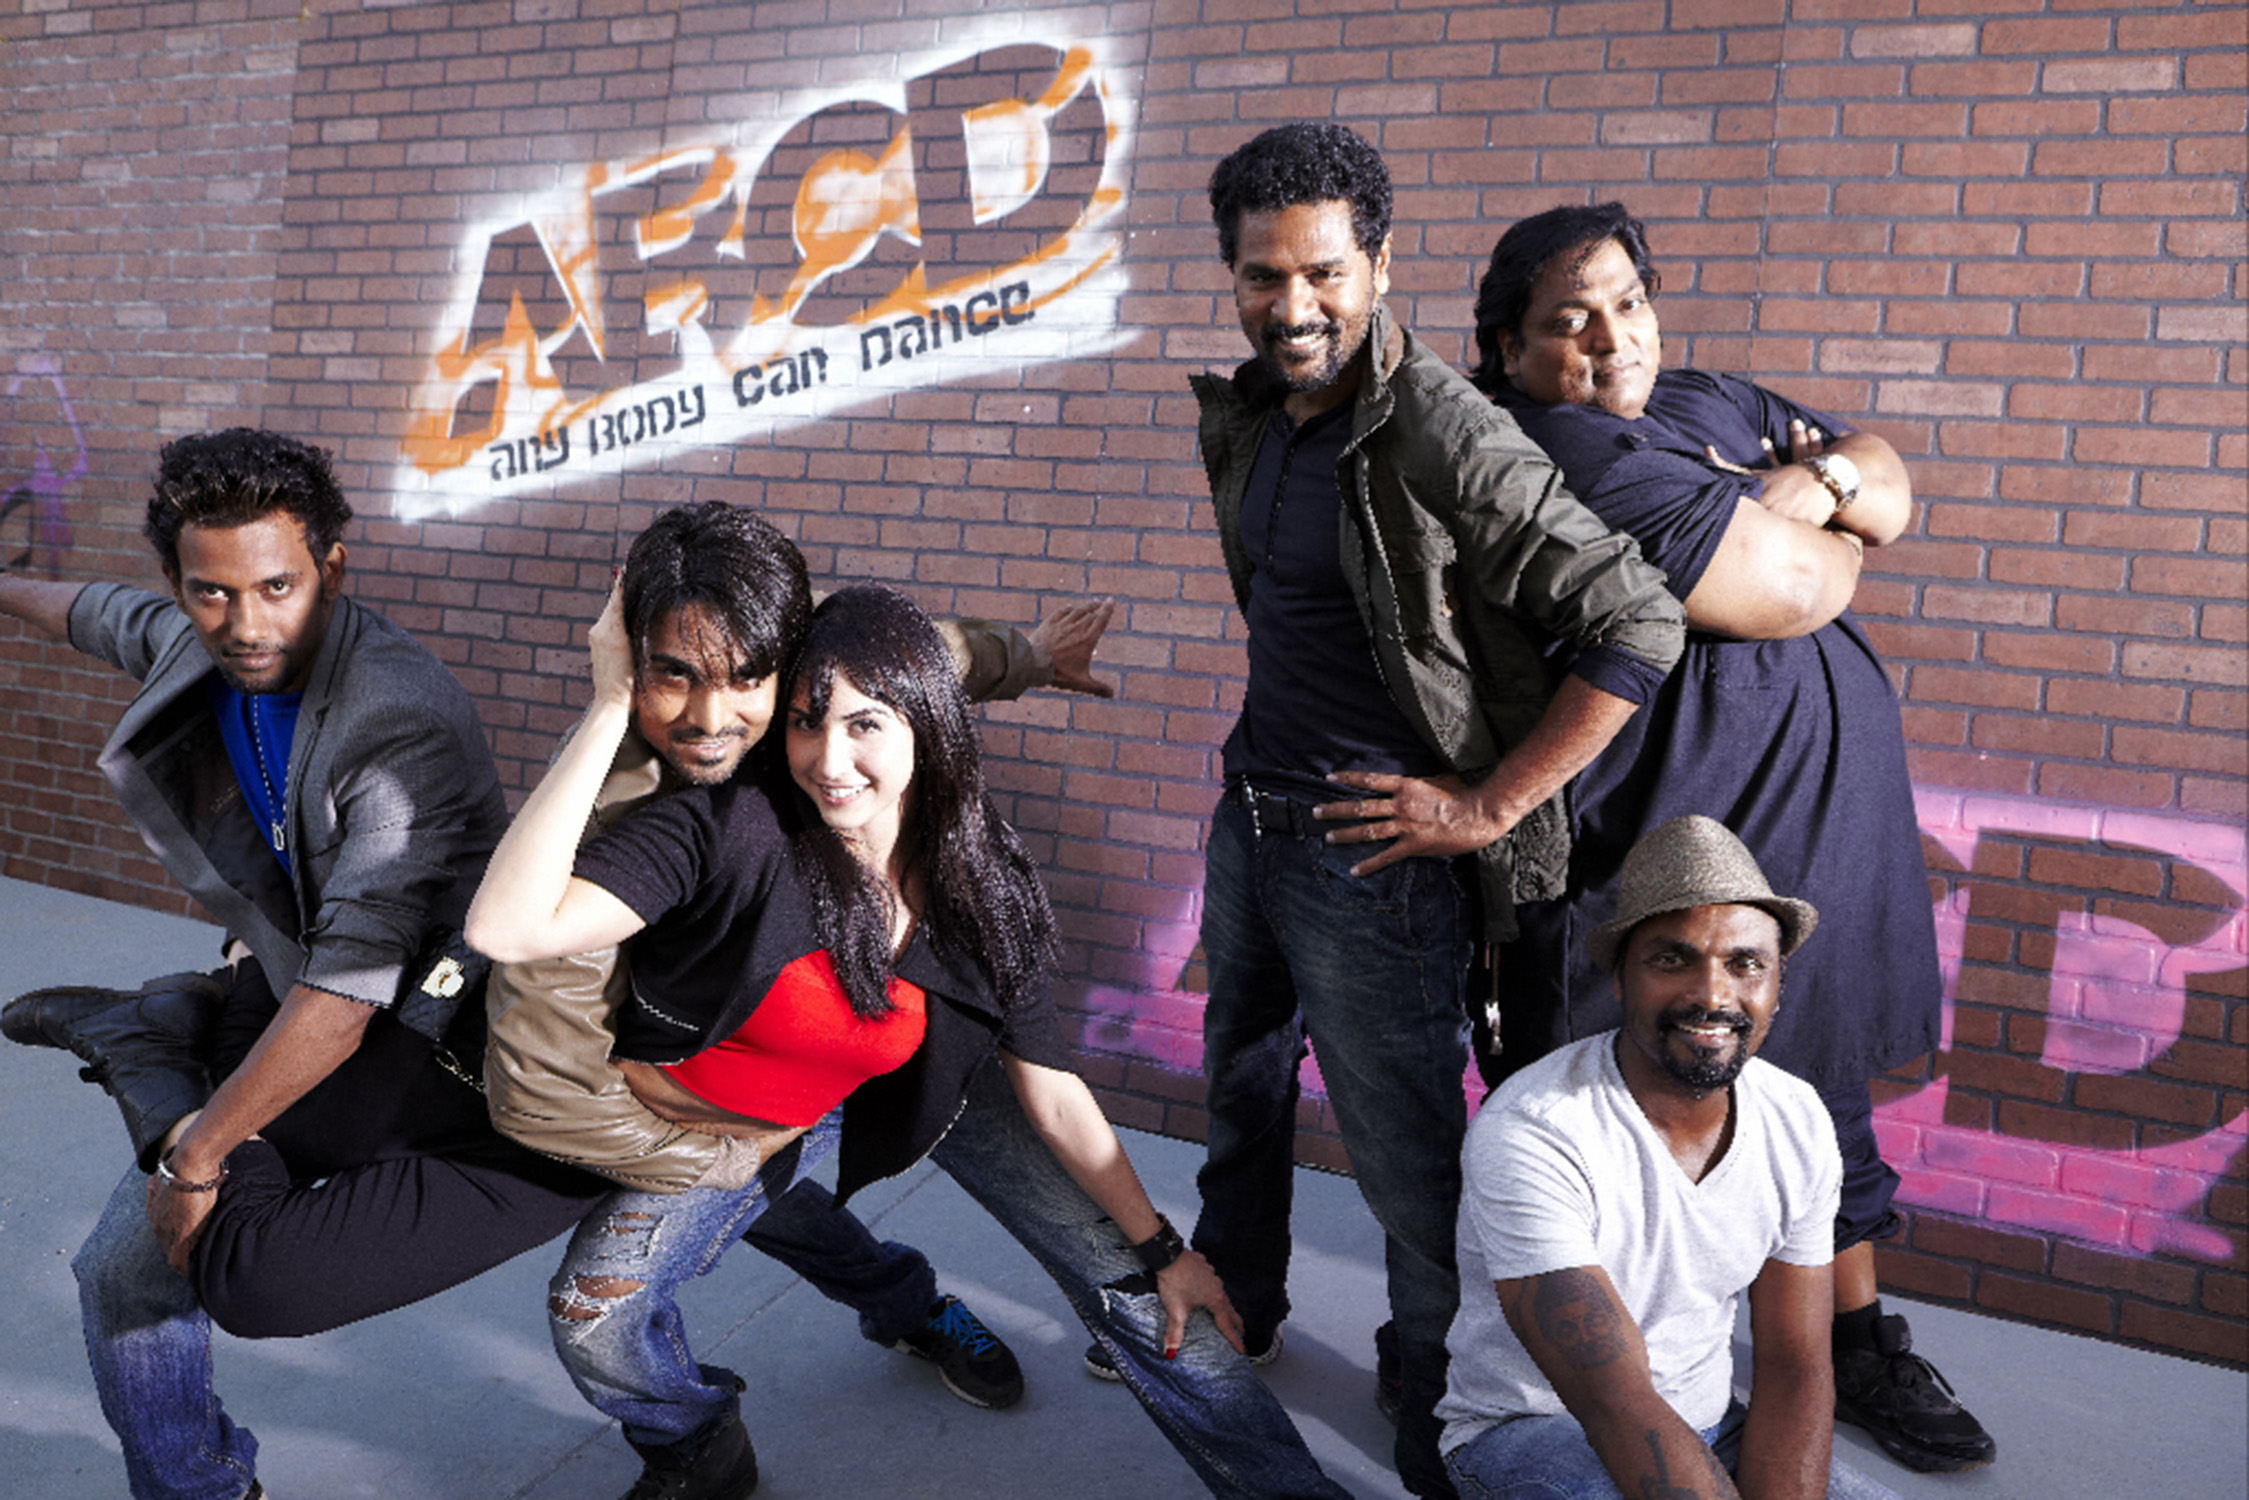 Any Body Can Dance focuses on a group of young people who must battle the odds to triumph in a dance competition.